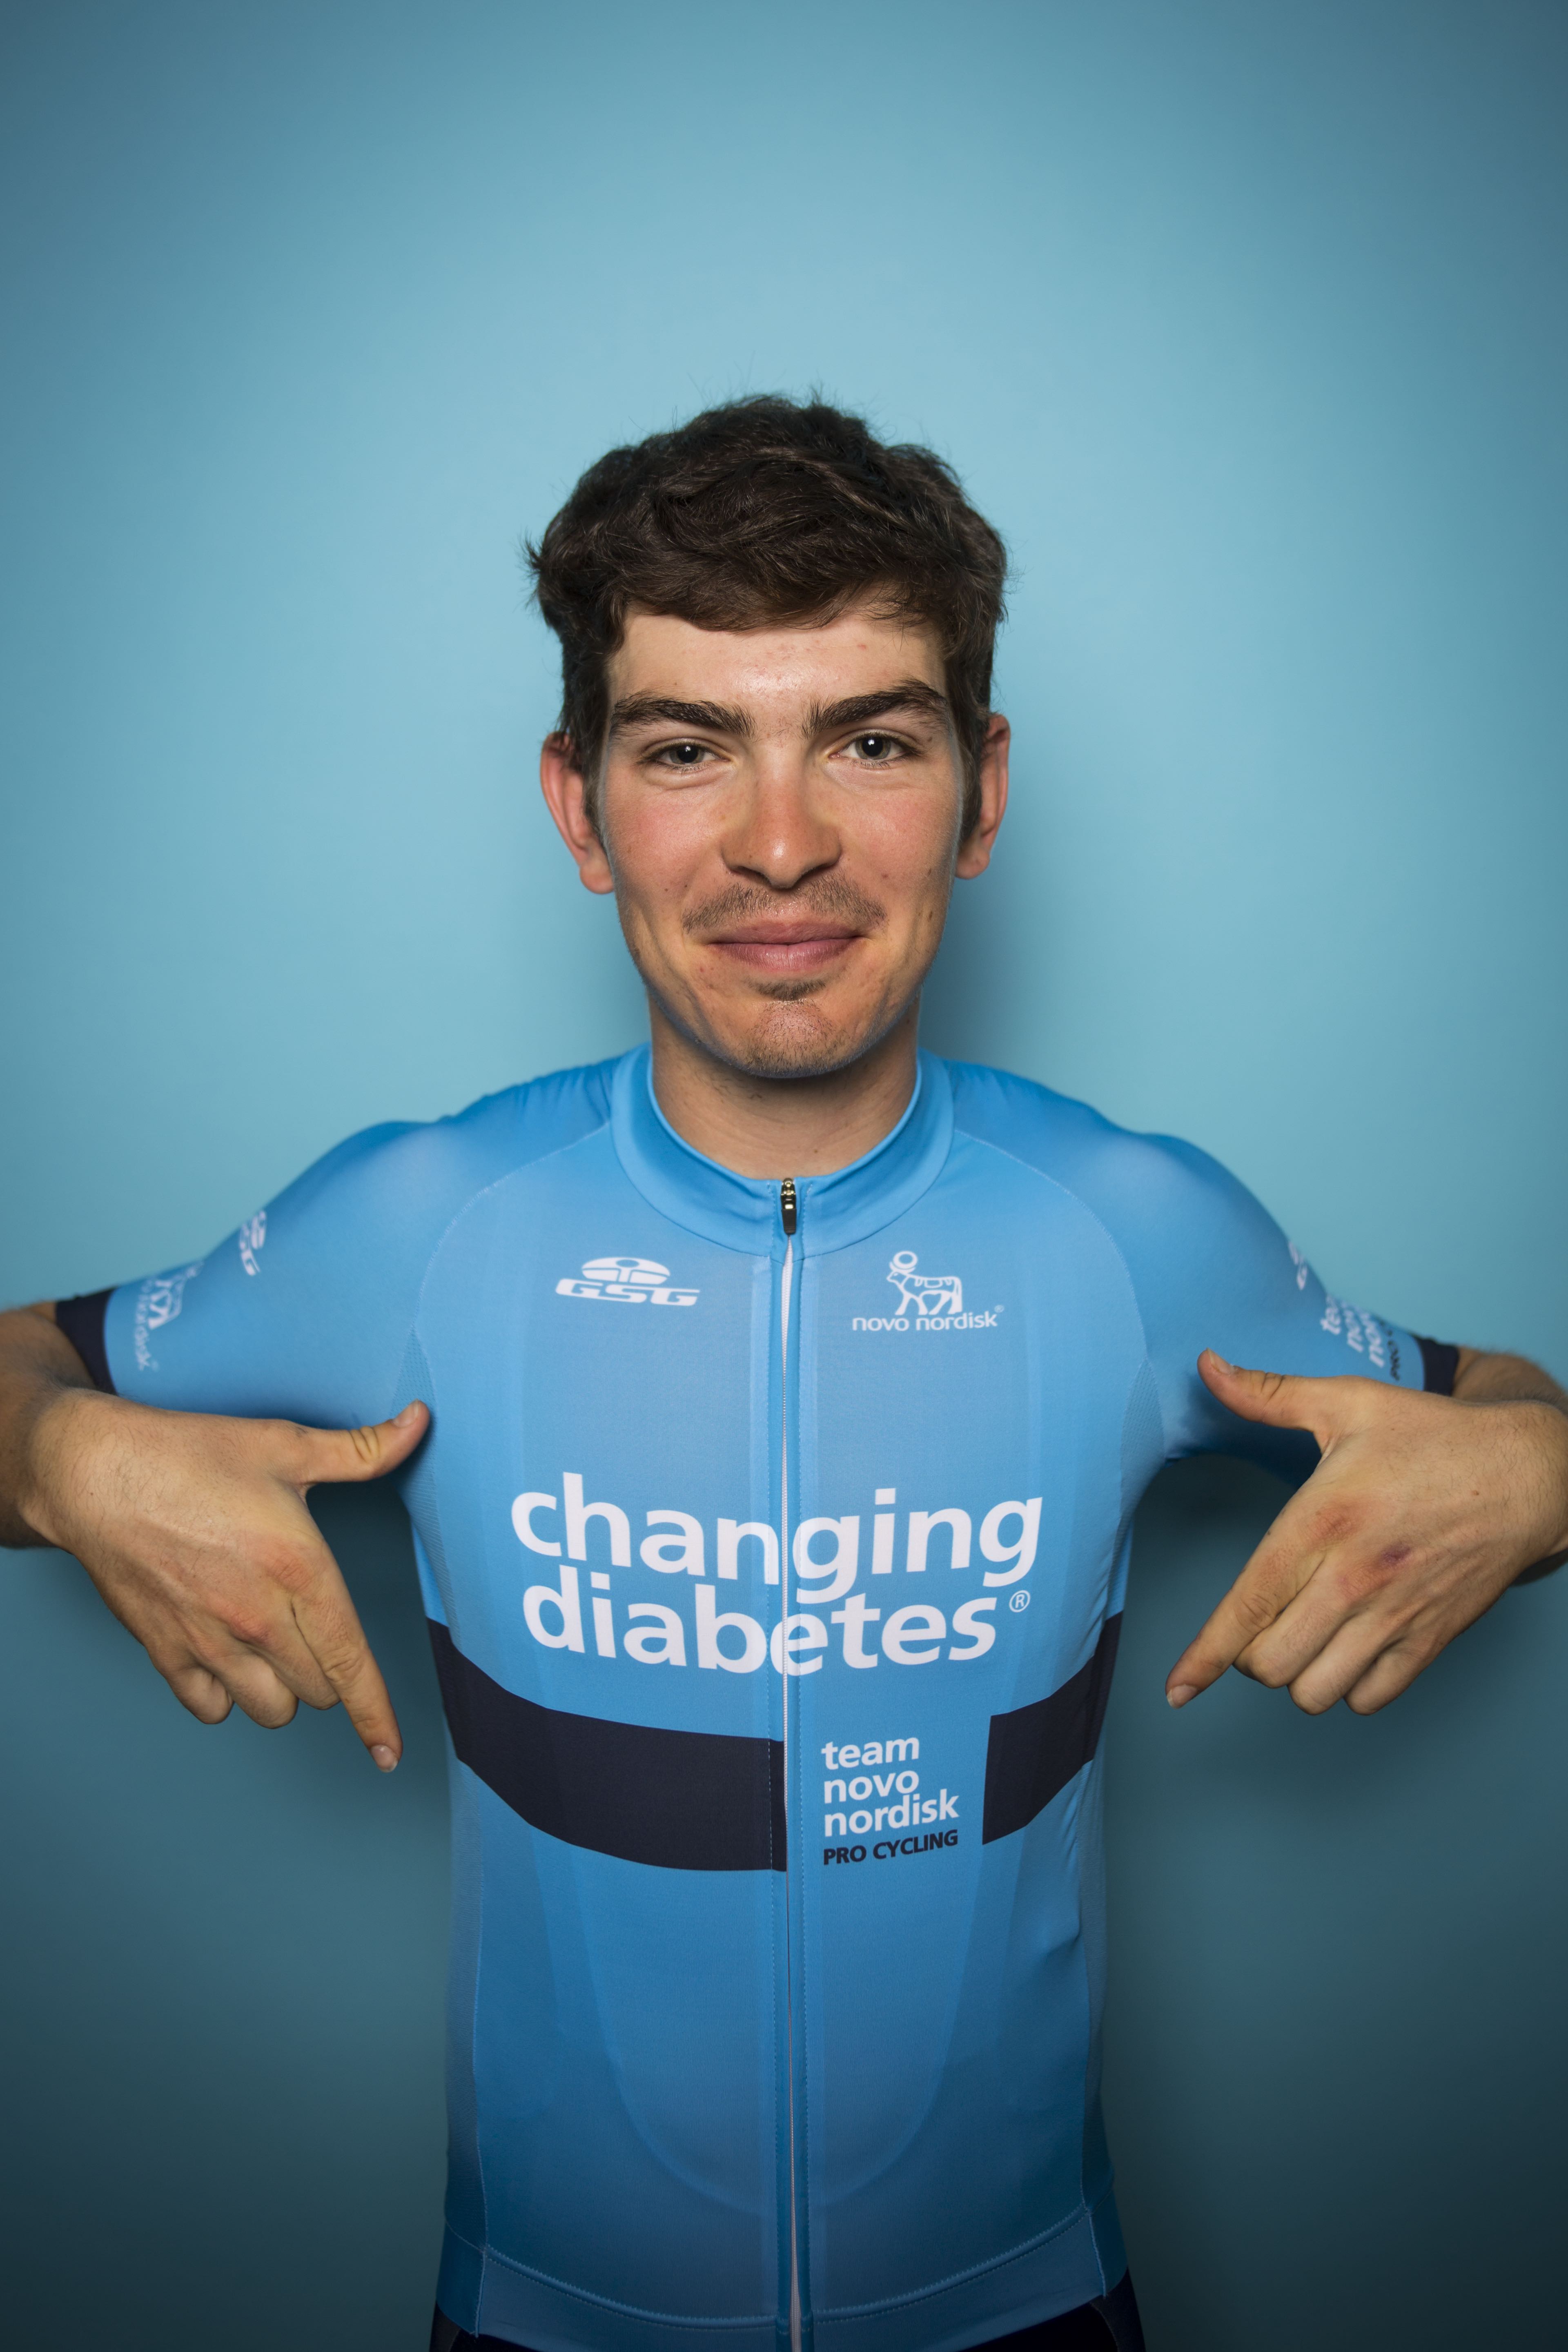 Team Novo Nordisk welcomes two stagiaires for the remainder of the 2018 season